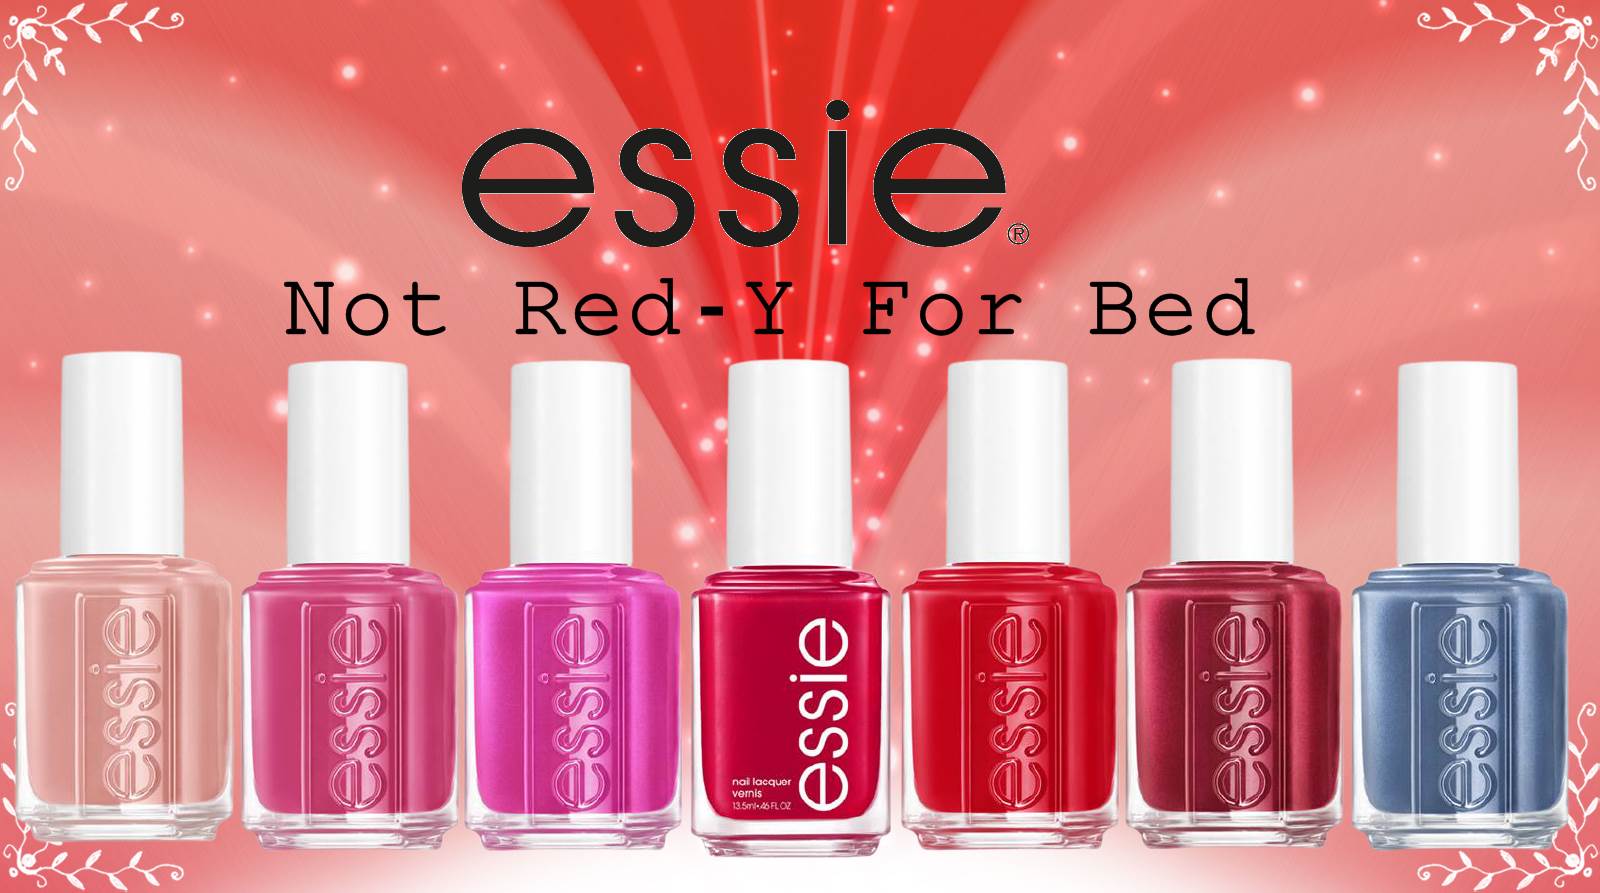 Essie Not Red-y Nail Bed Images Review – Essie Polish For Collection 